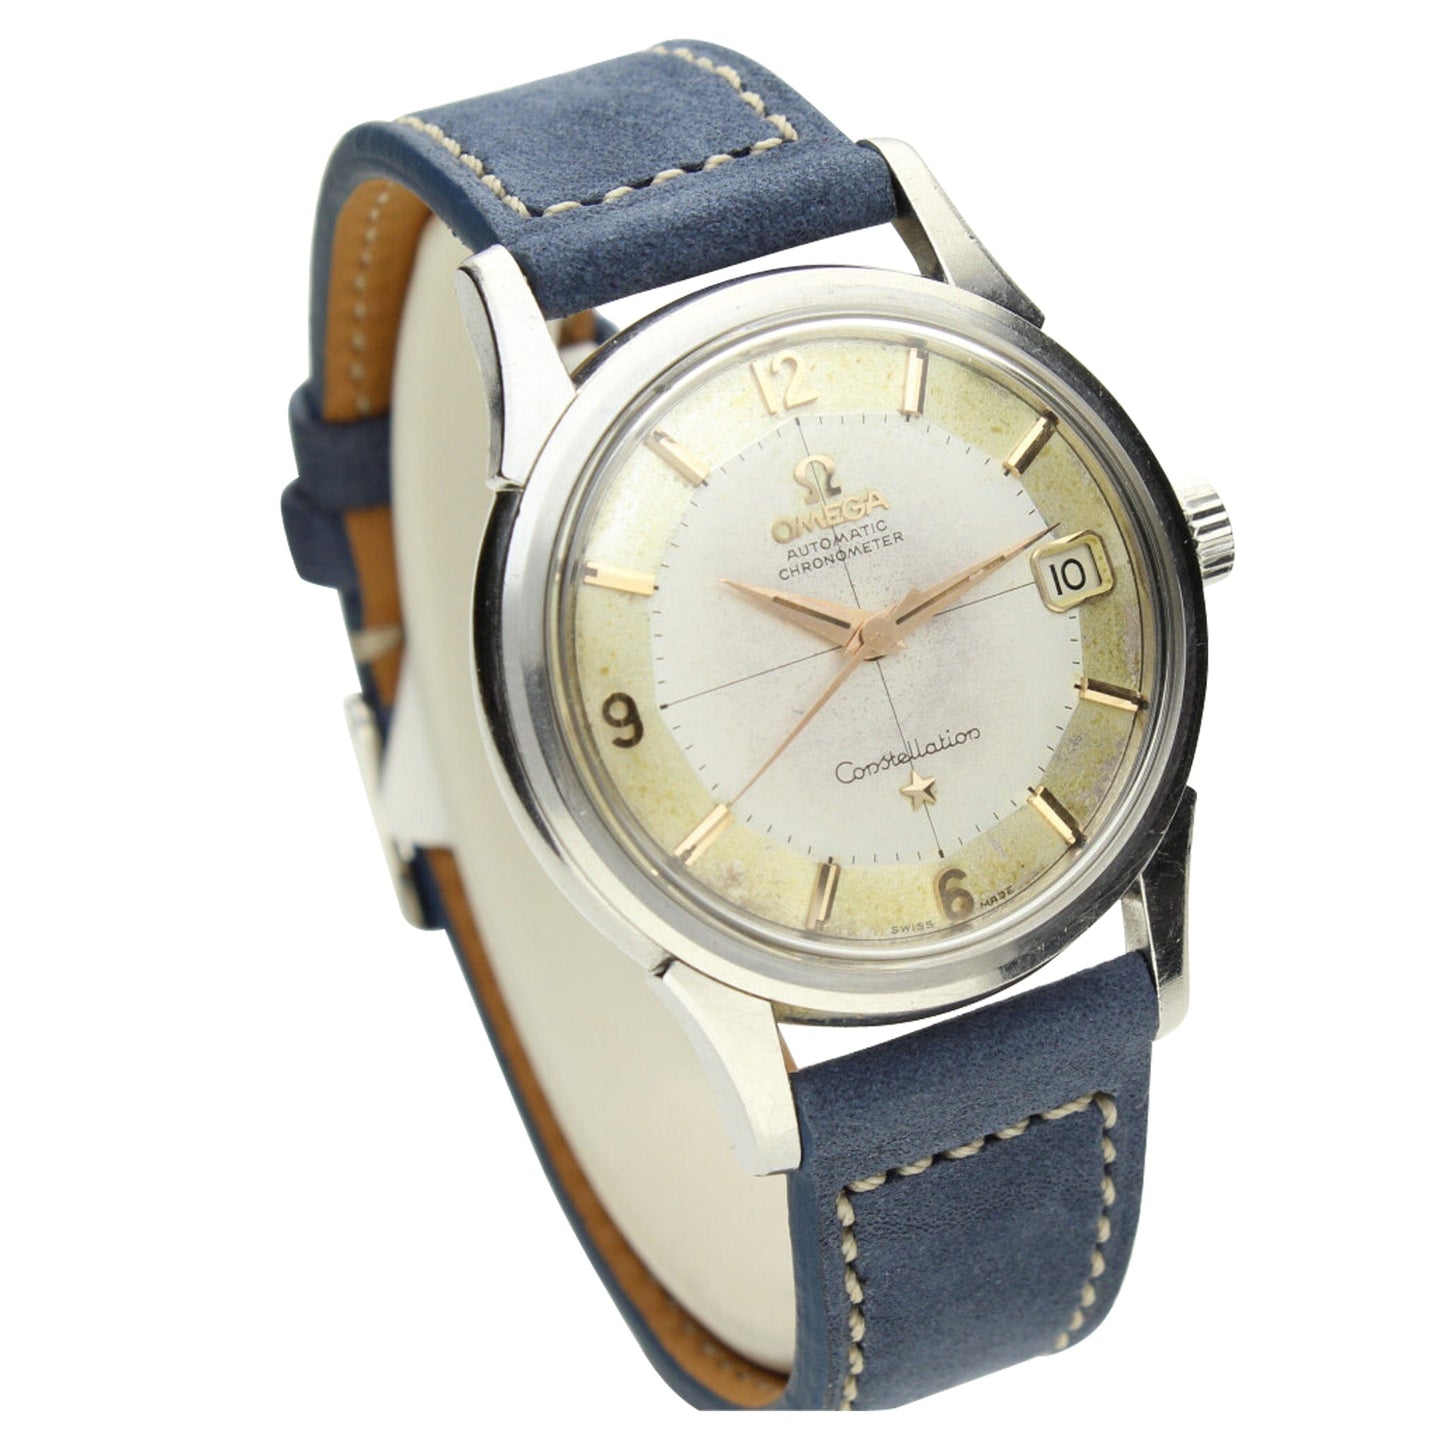 Stainless steel 'Constellation' automatic chronometer wristwatch. Made 1960